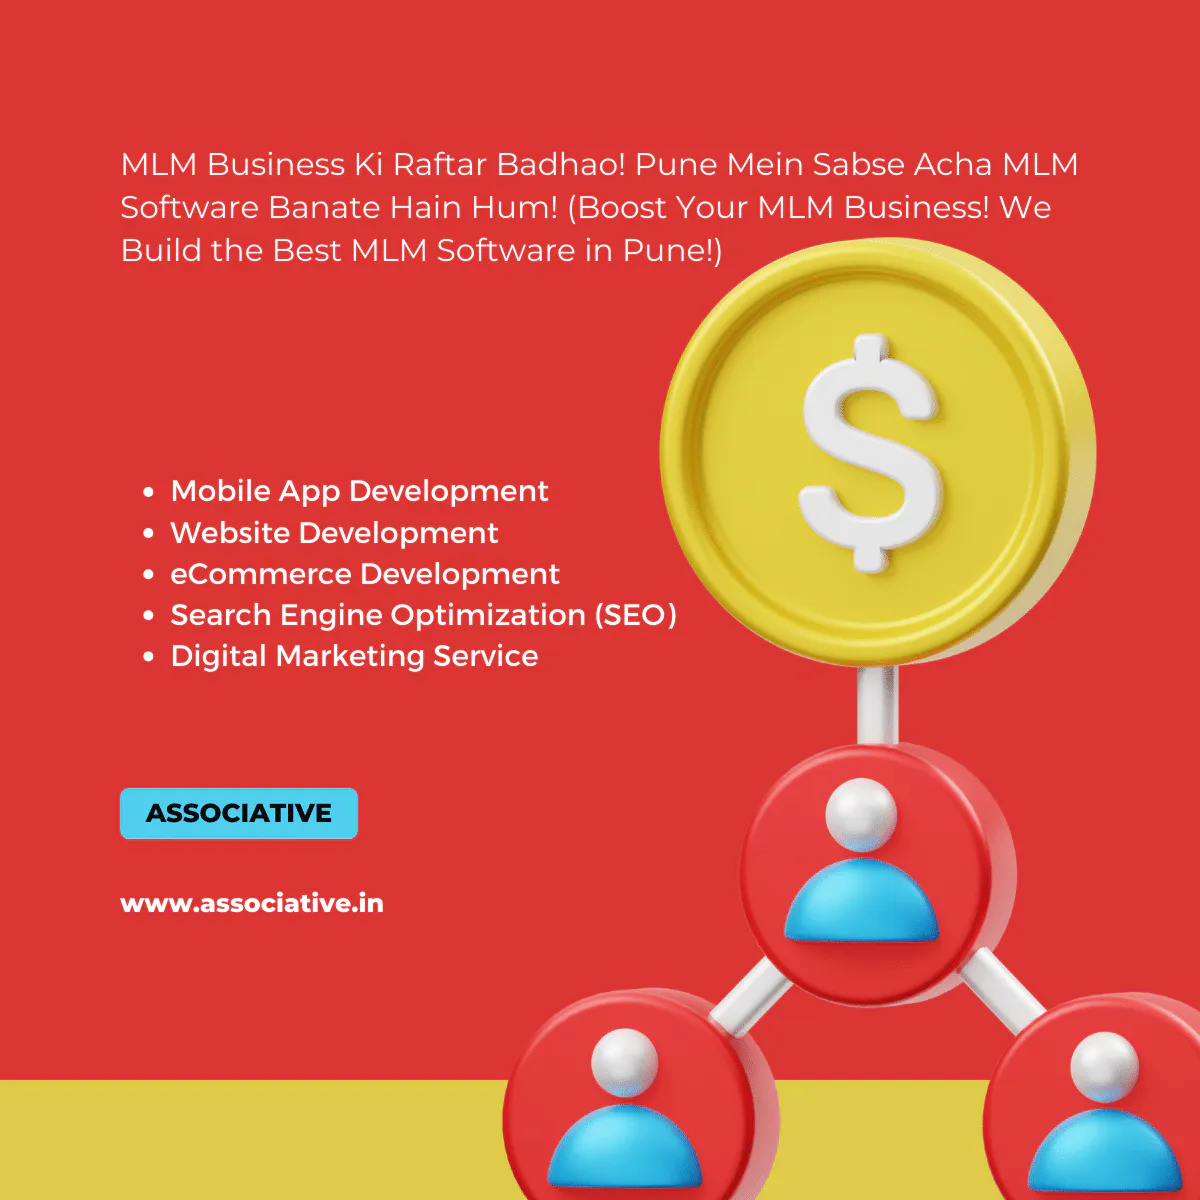 Boost Your MLM Business: We Build the Best MLM Software in Pune